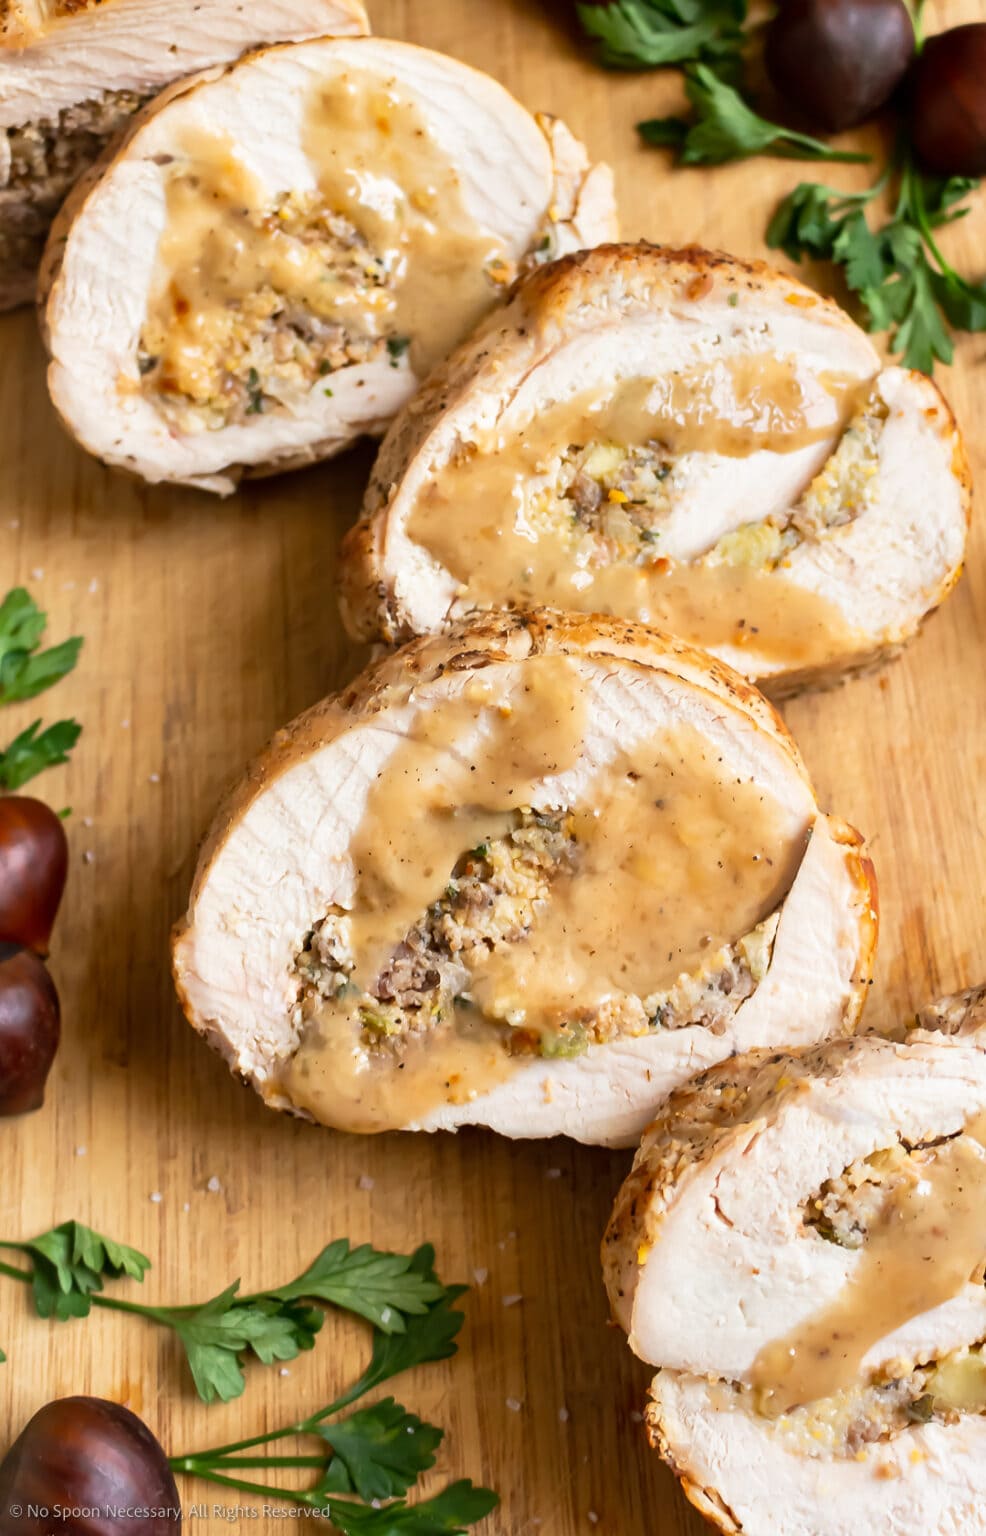 Thanksgiving Turkey Breast Roulade slices with sauce on a wooden cutting board